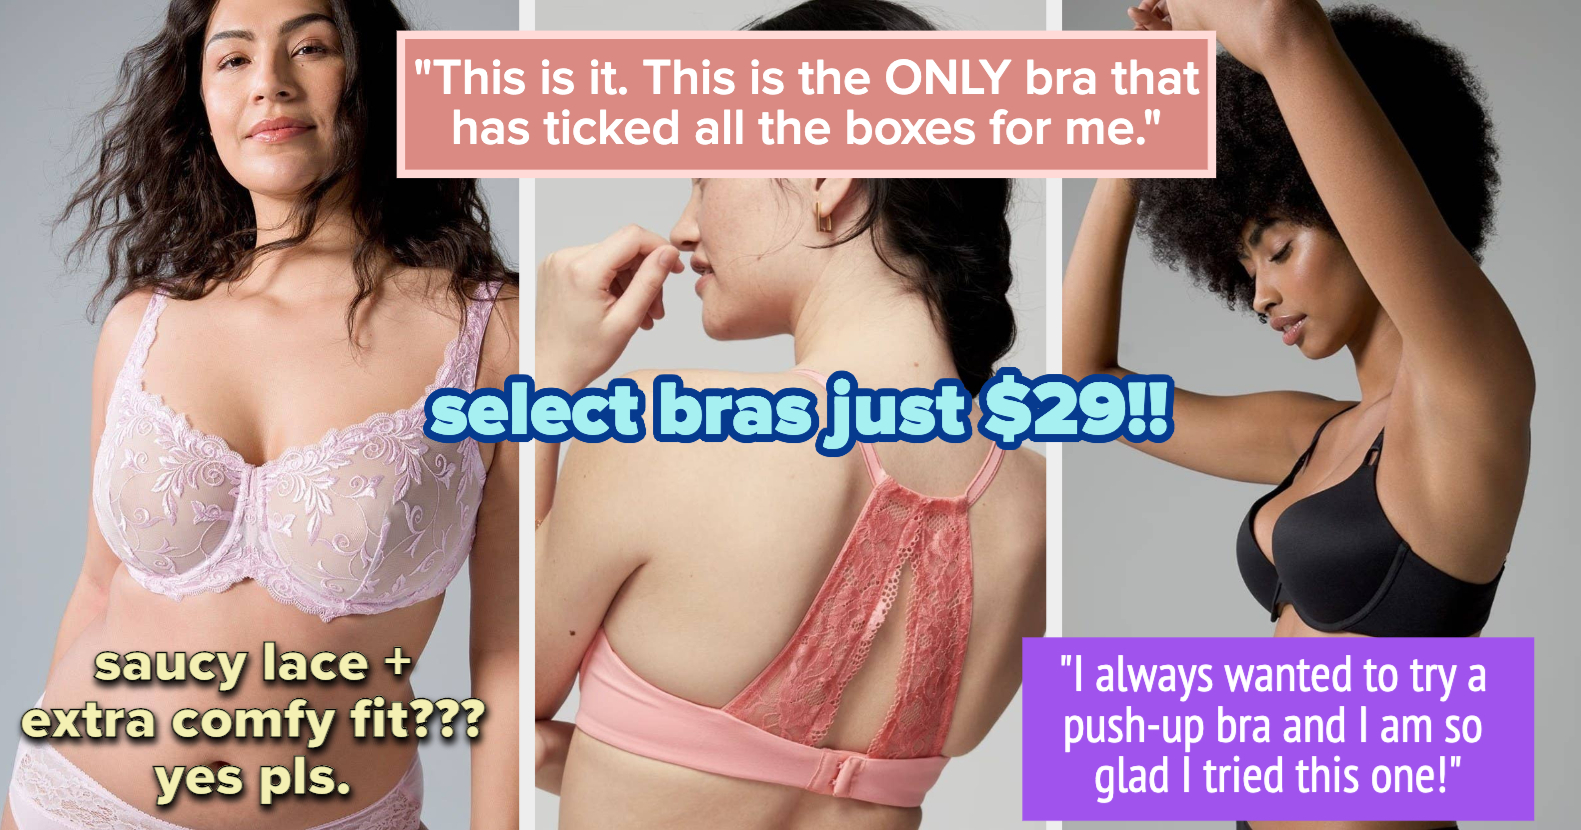 One Hot Bra Sale  This is one HOT bra sale! Hurry in to Soma